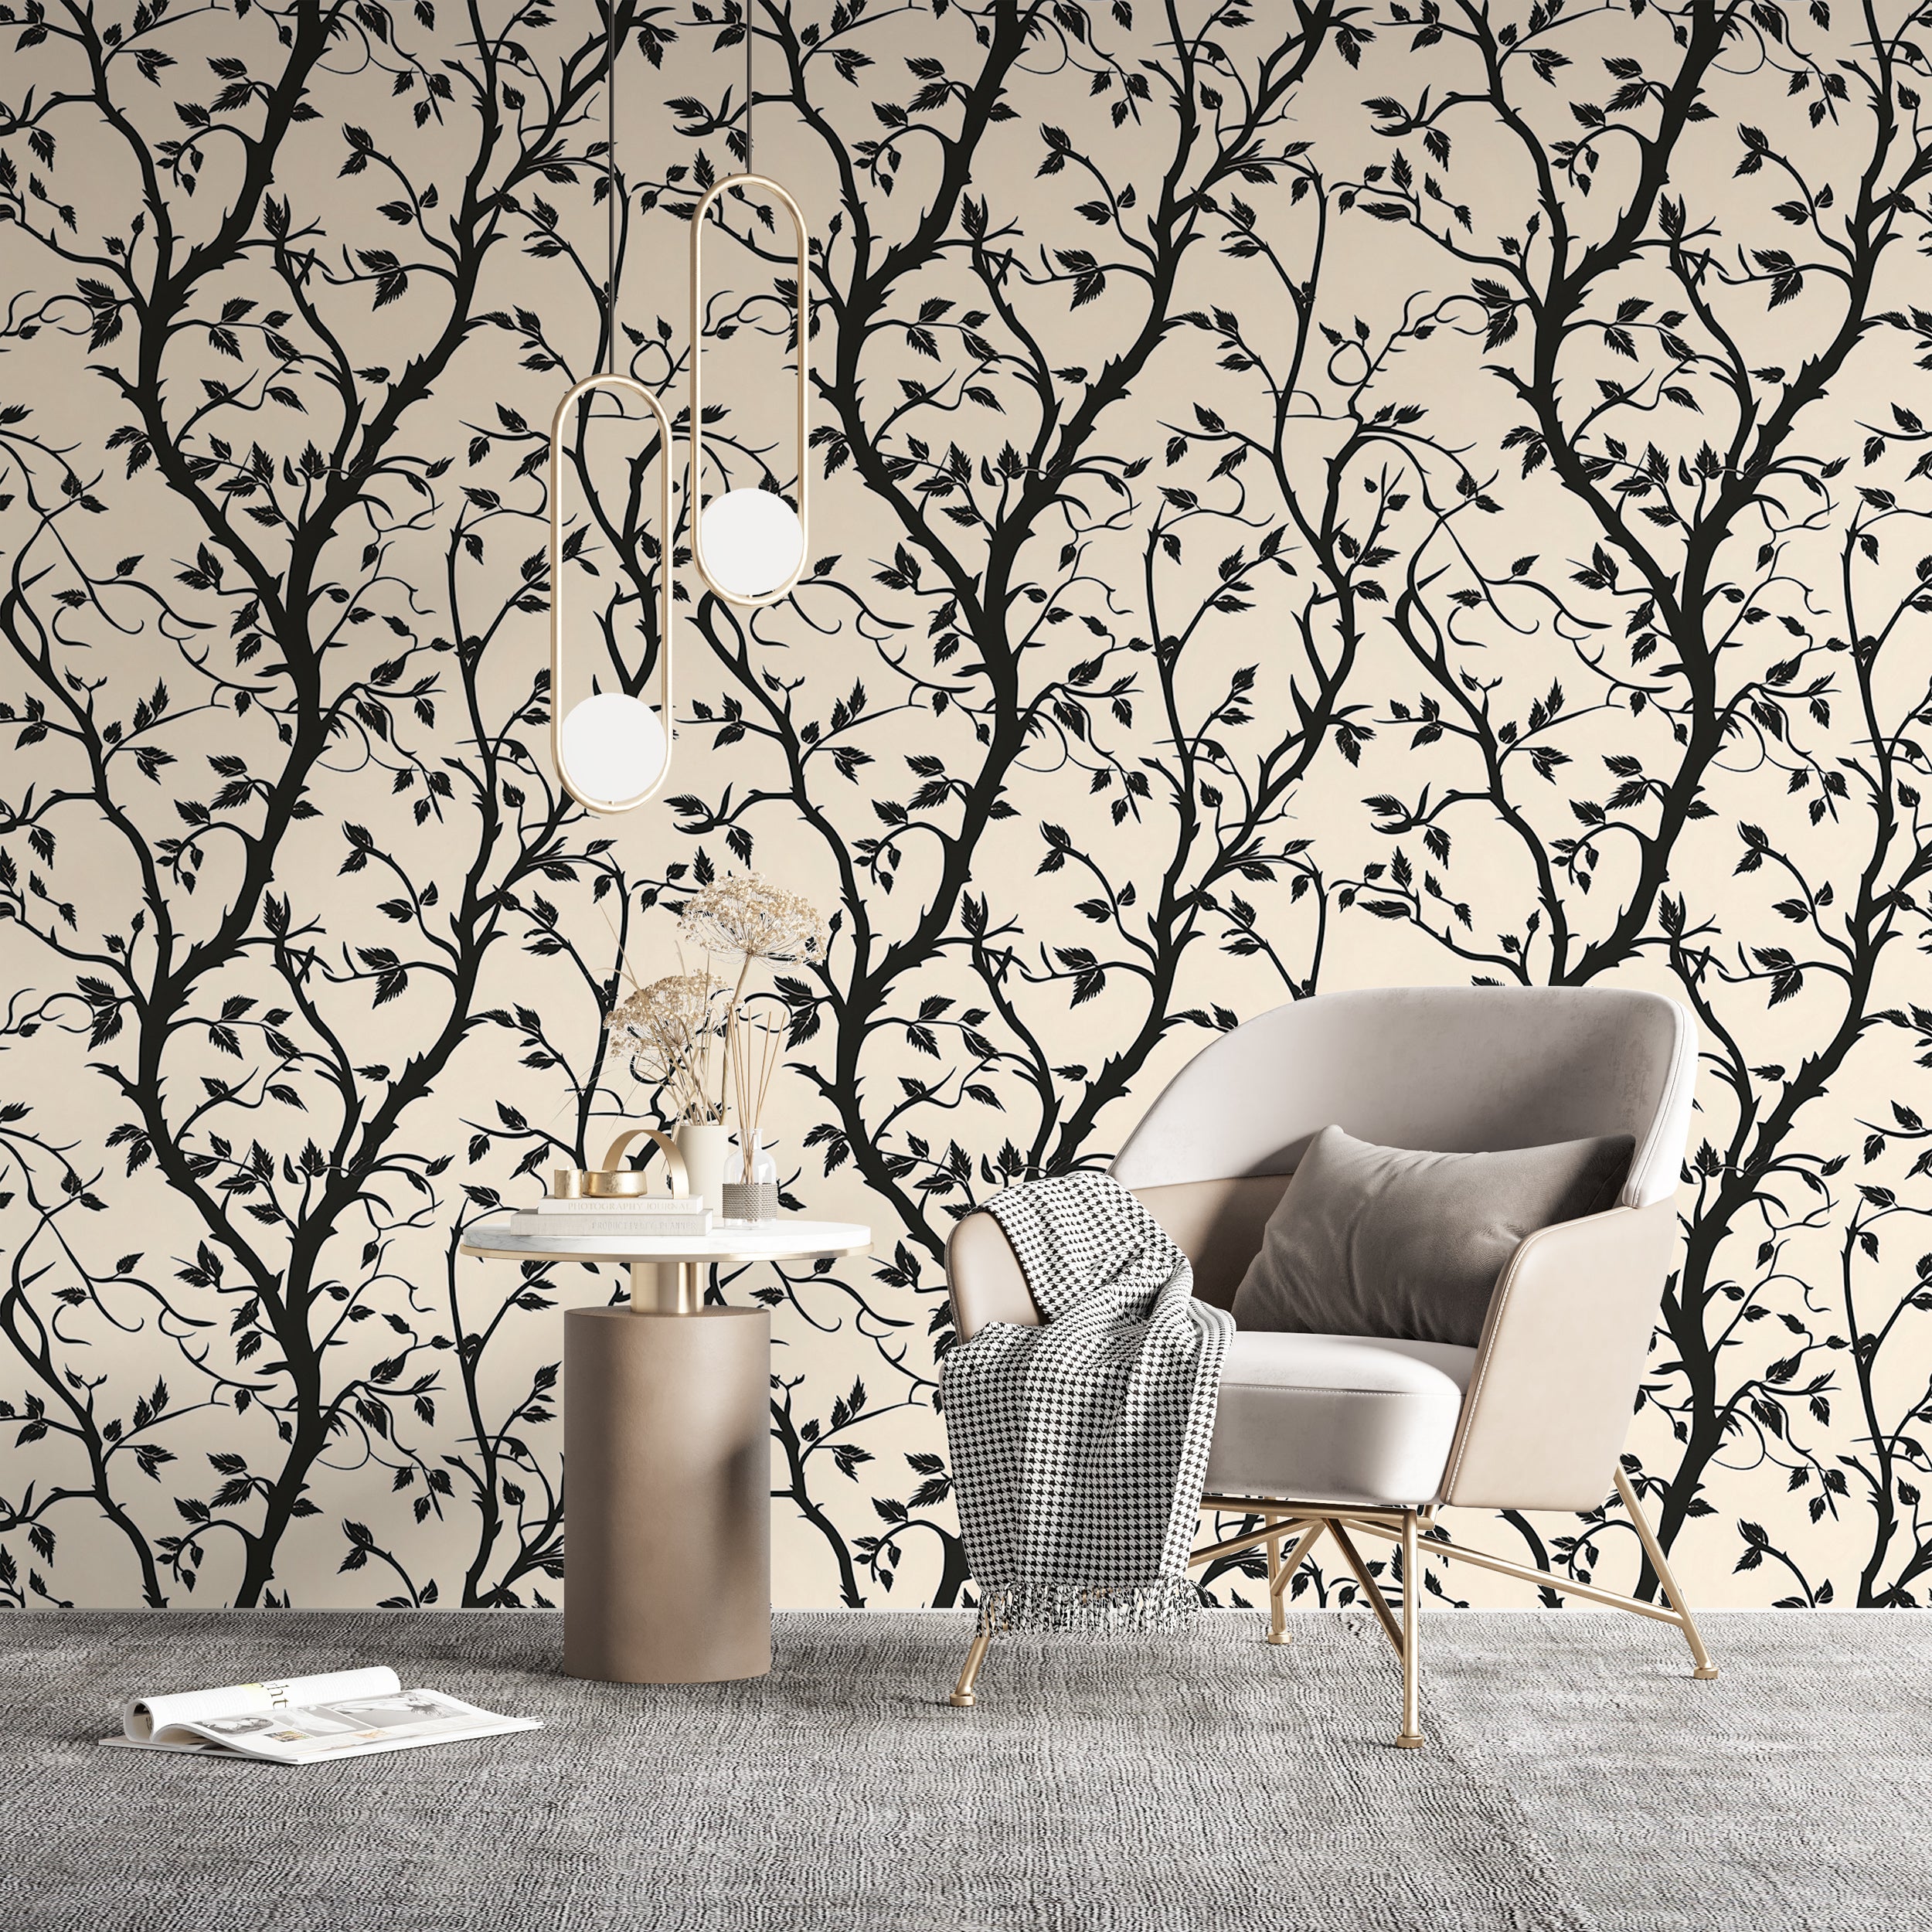 Leaves and branches wallpaper peel and stick Beige and black botanical wallpaper